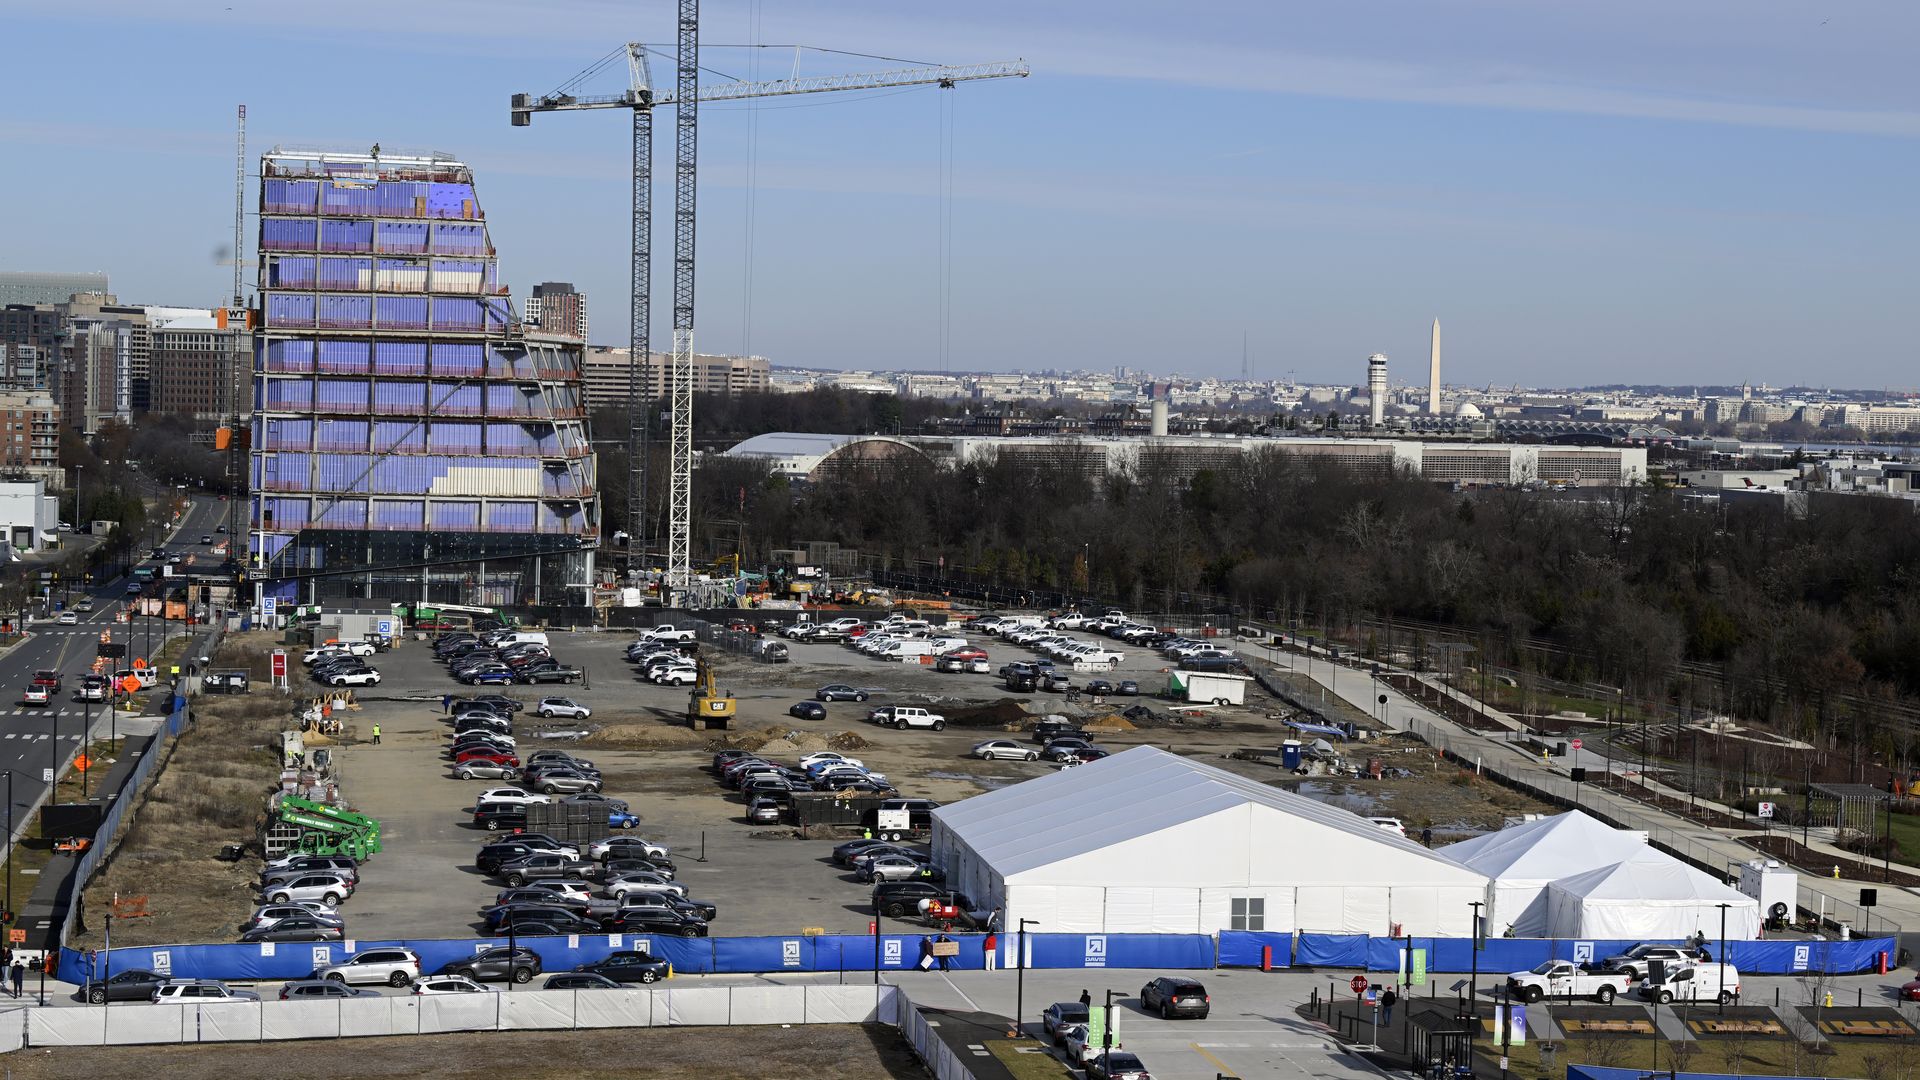 An image of the future Virginia Tech Innovation Campus under construction, with cranes.